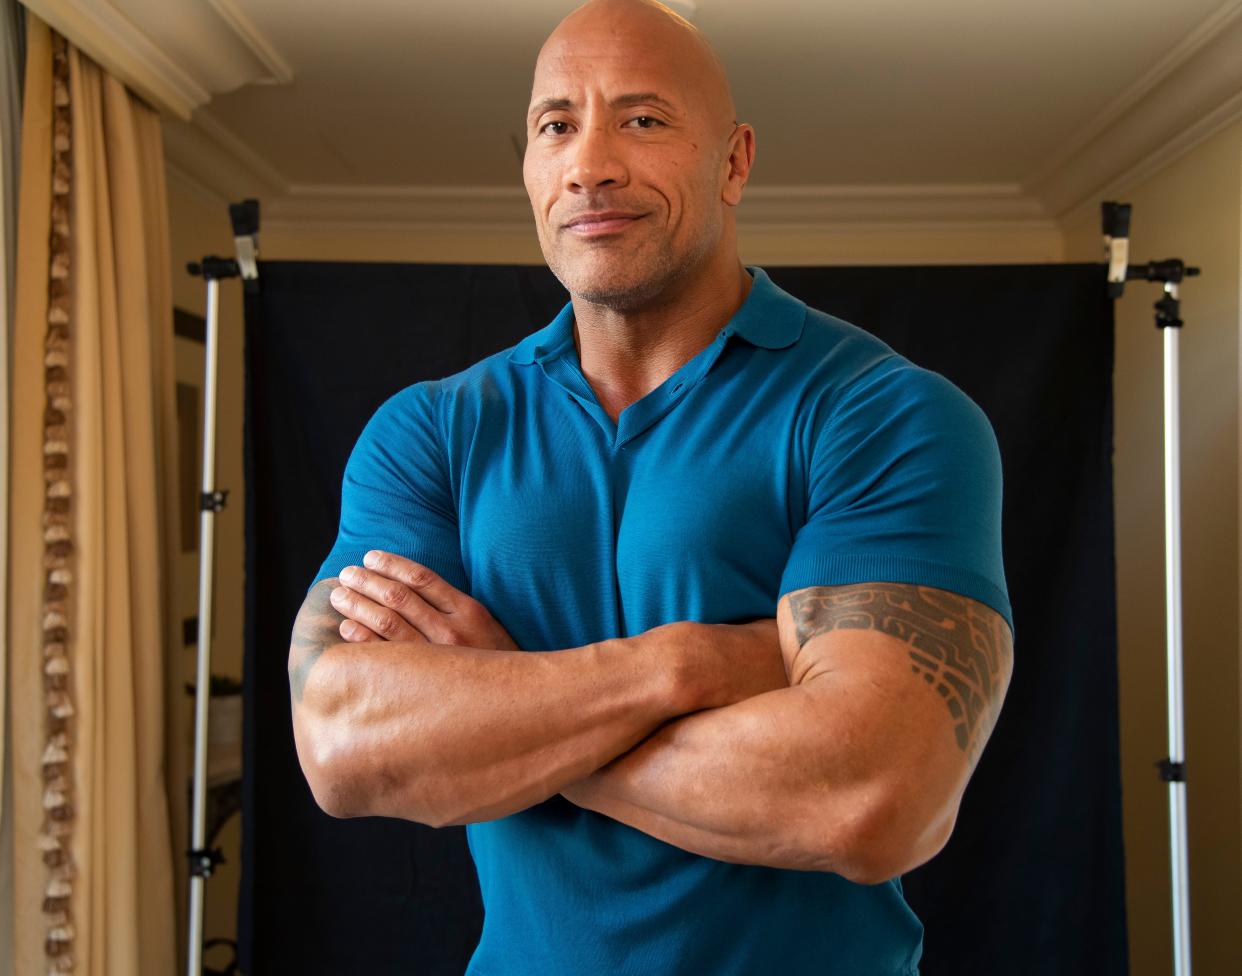 Dwayne Johnson has been a character in the wrestling ring and in many movies since he made the jump from grappler to Hollywood superstar.